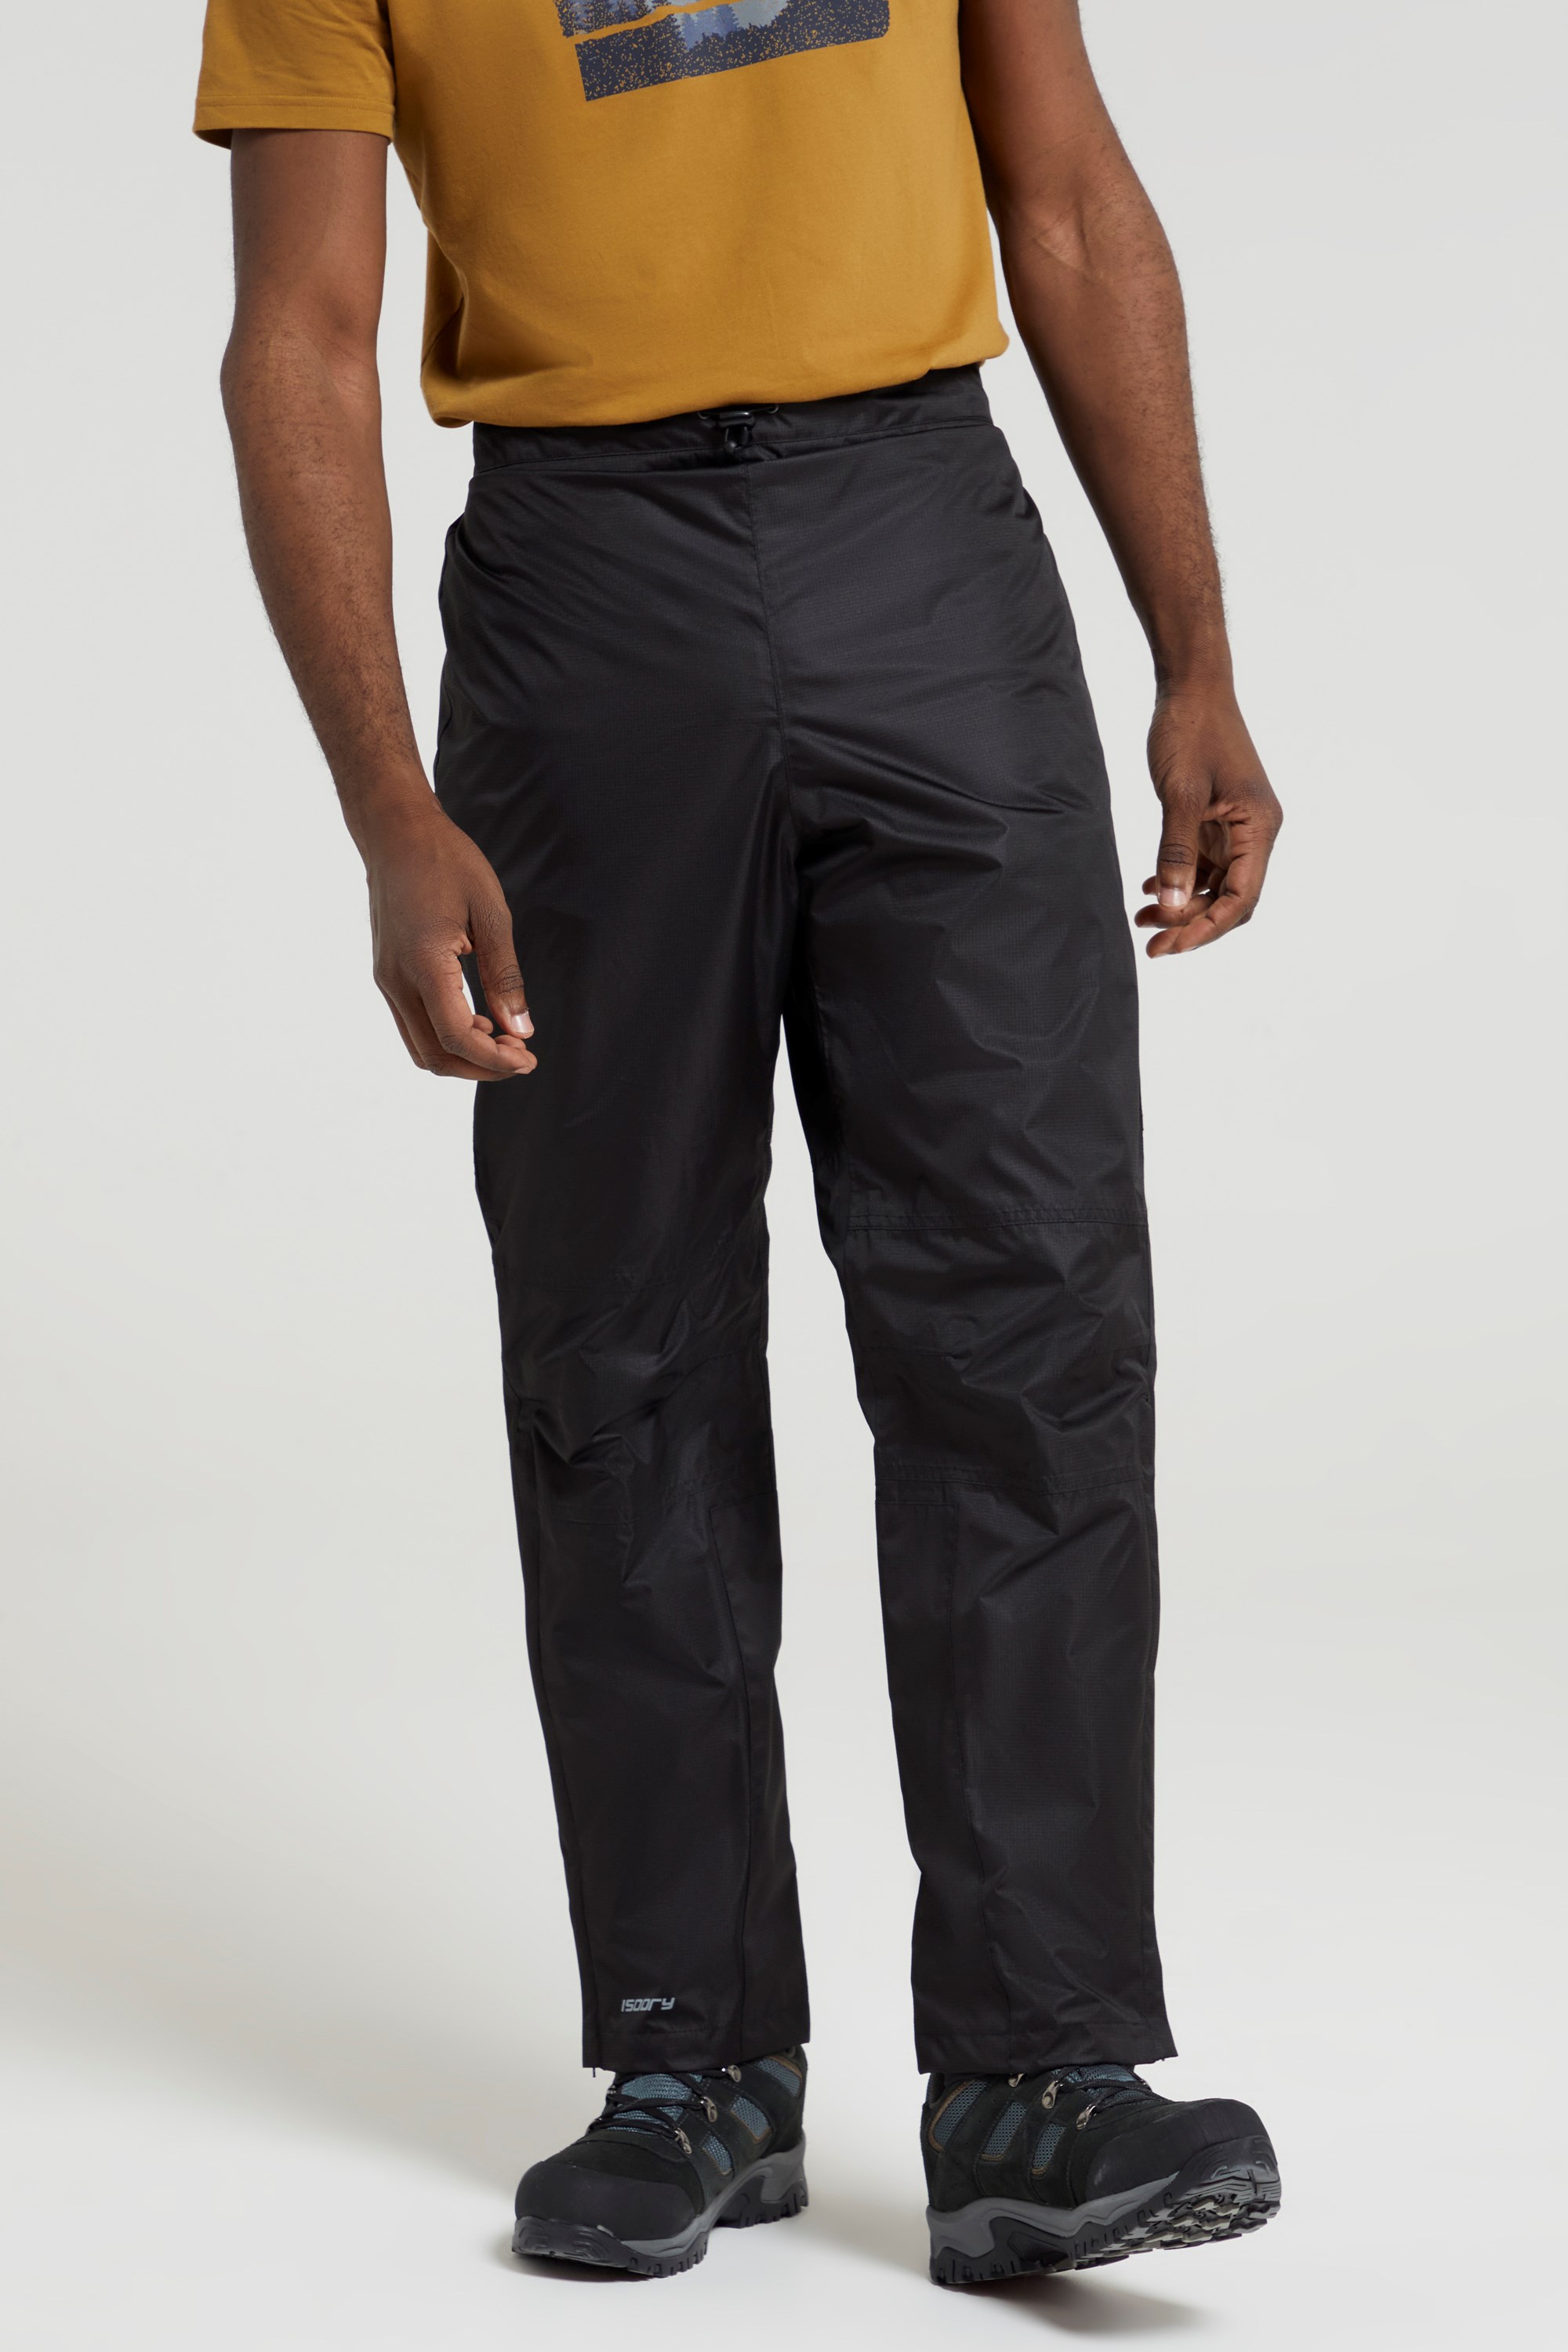 Mountain Warehouse Downpour Mens Waterproof Overtrousers - Rain Pants :  : Clothing, Shoes & Accessories